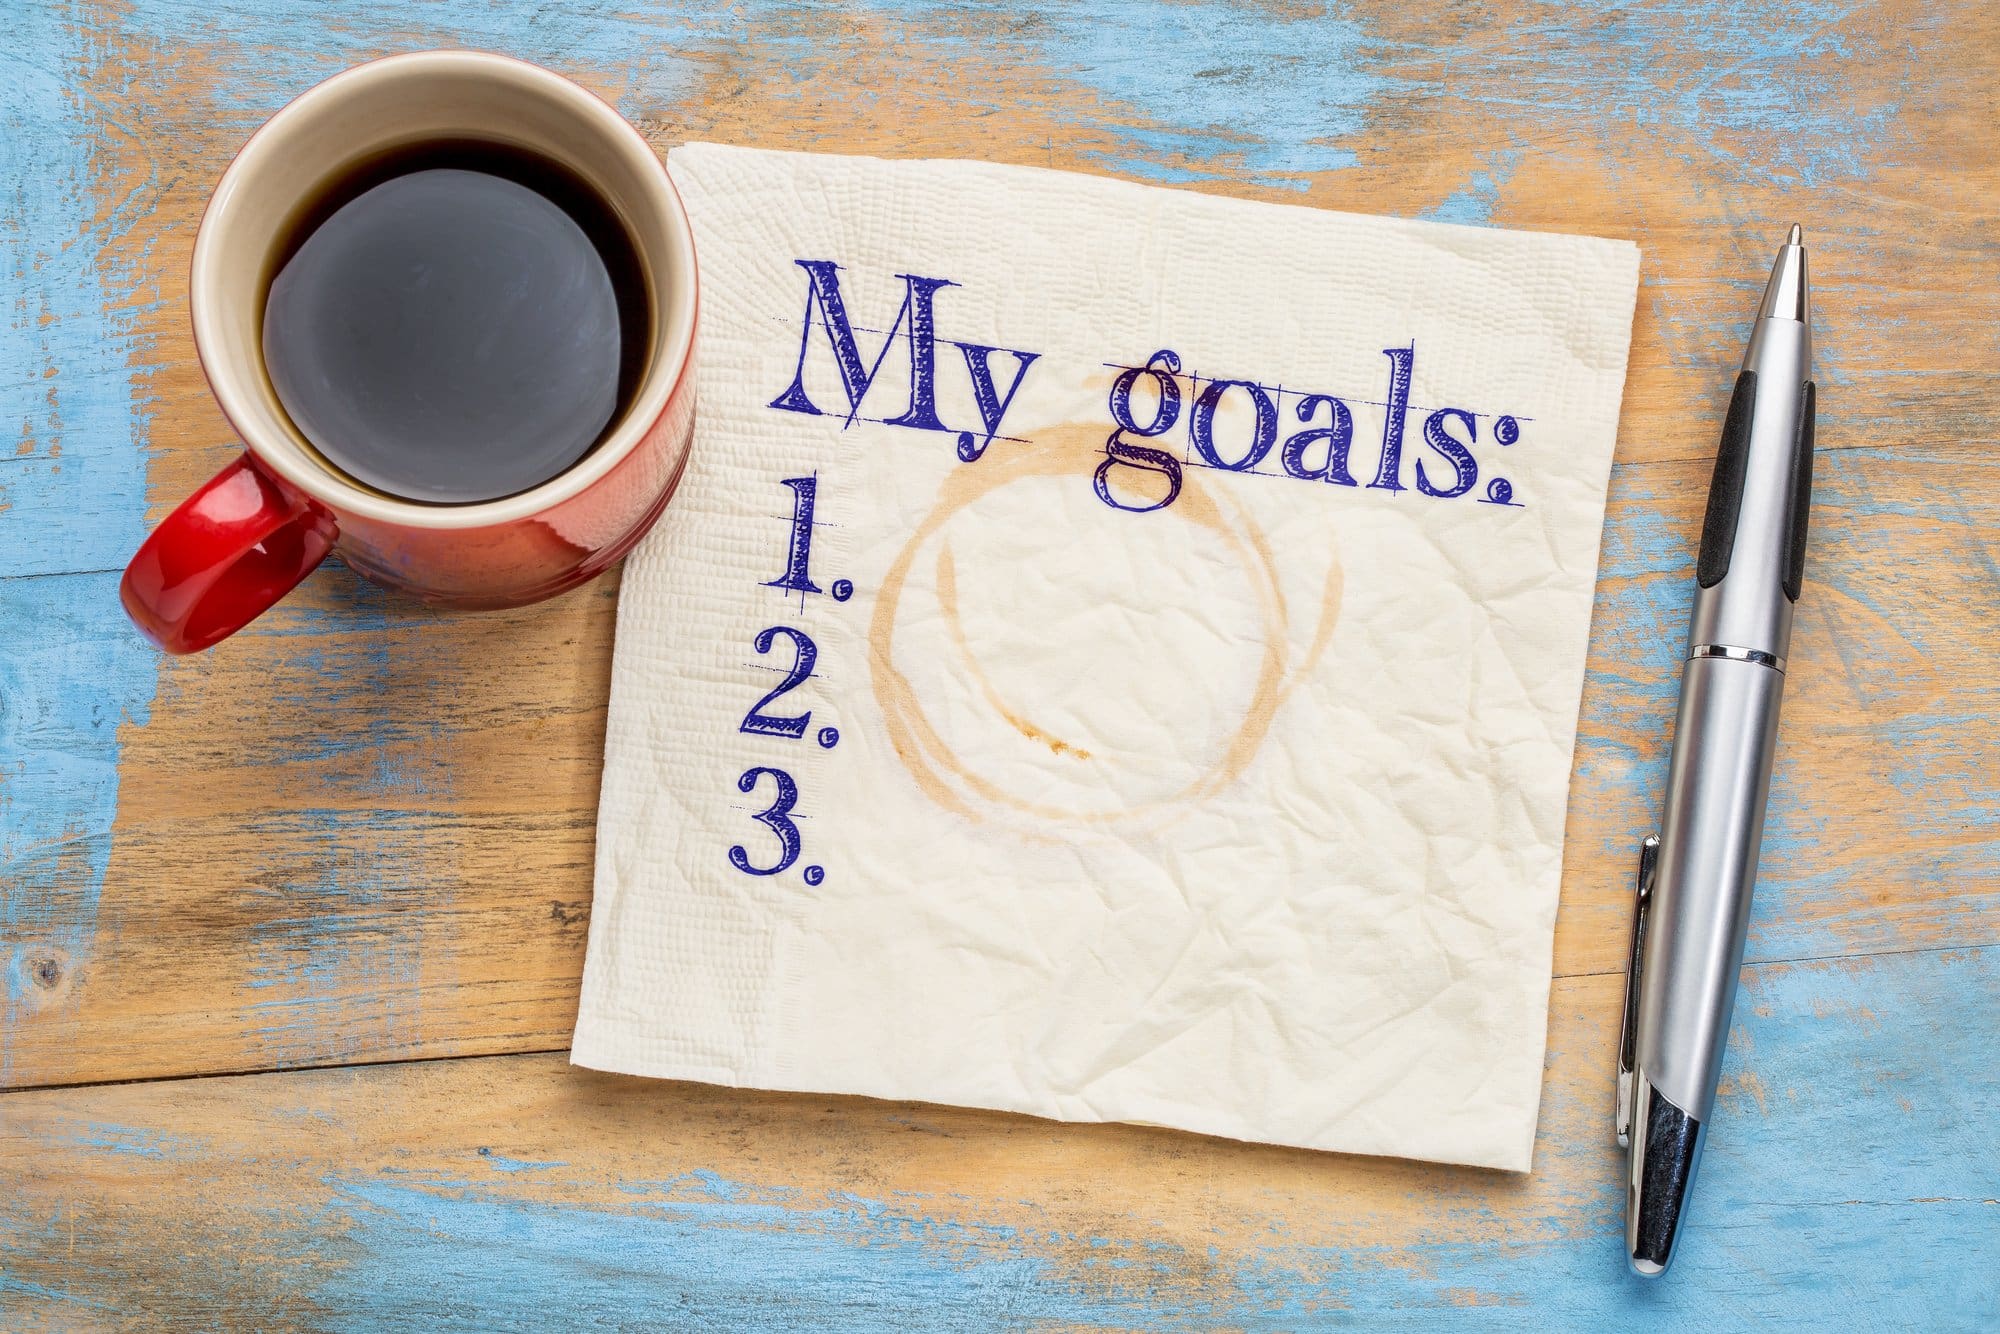 My goals list on napkin and coffee